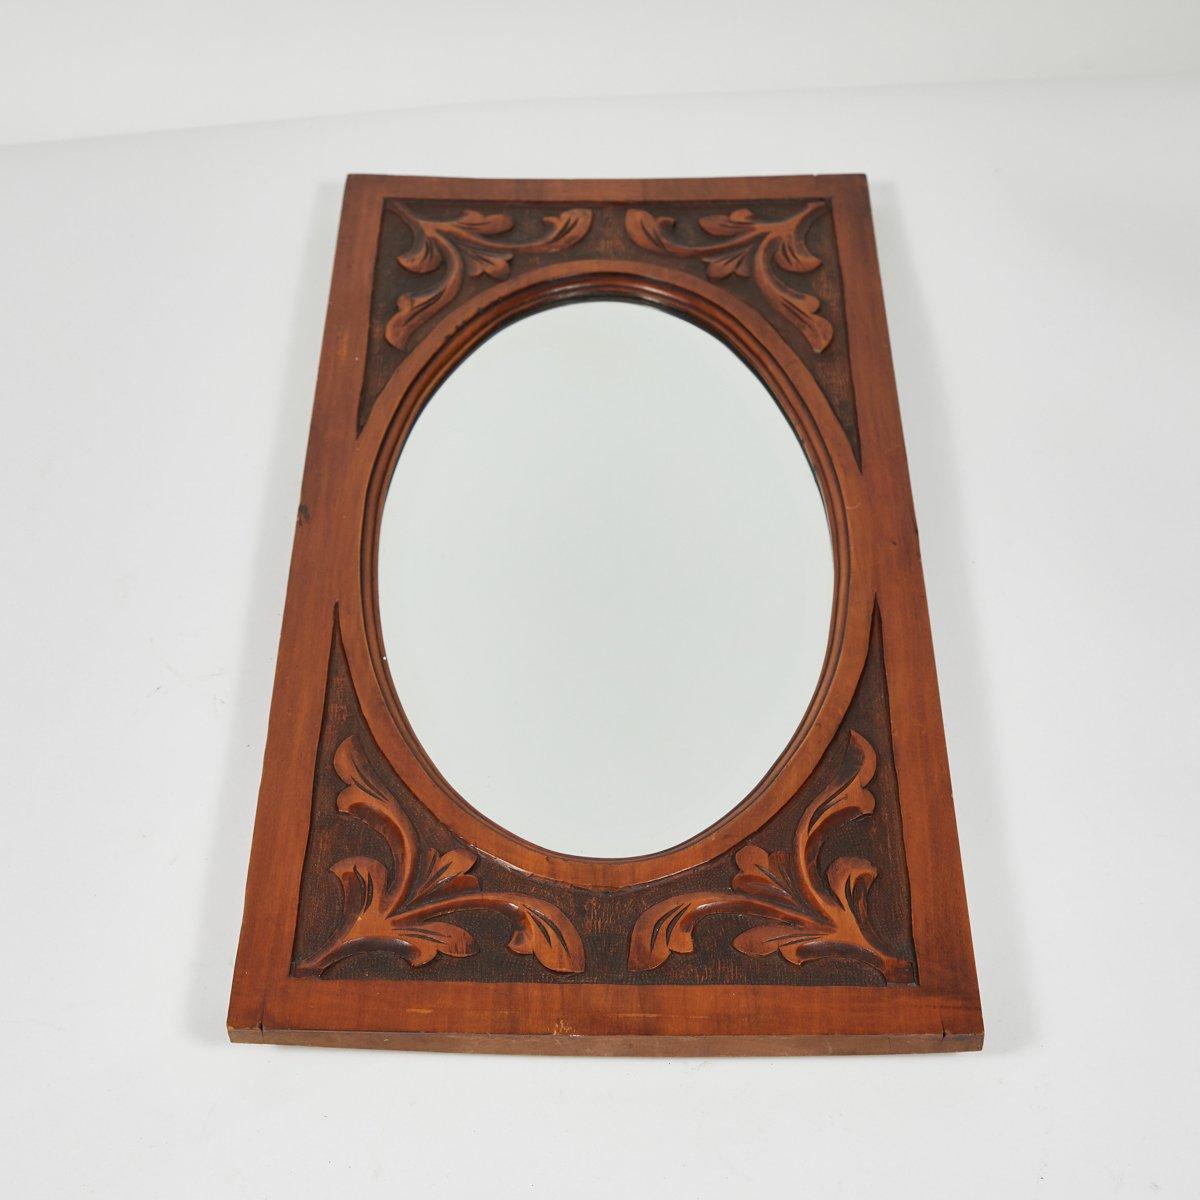 Late 19th-century English mahogany with oval beveled glass. The rectangular frame features carved bas relief floral accents and a thin, flat border. Delicate yet sturdy, the piece has an understated charm. 

England, circa 1880

Dimensions: 11W x